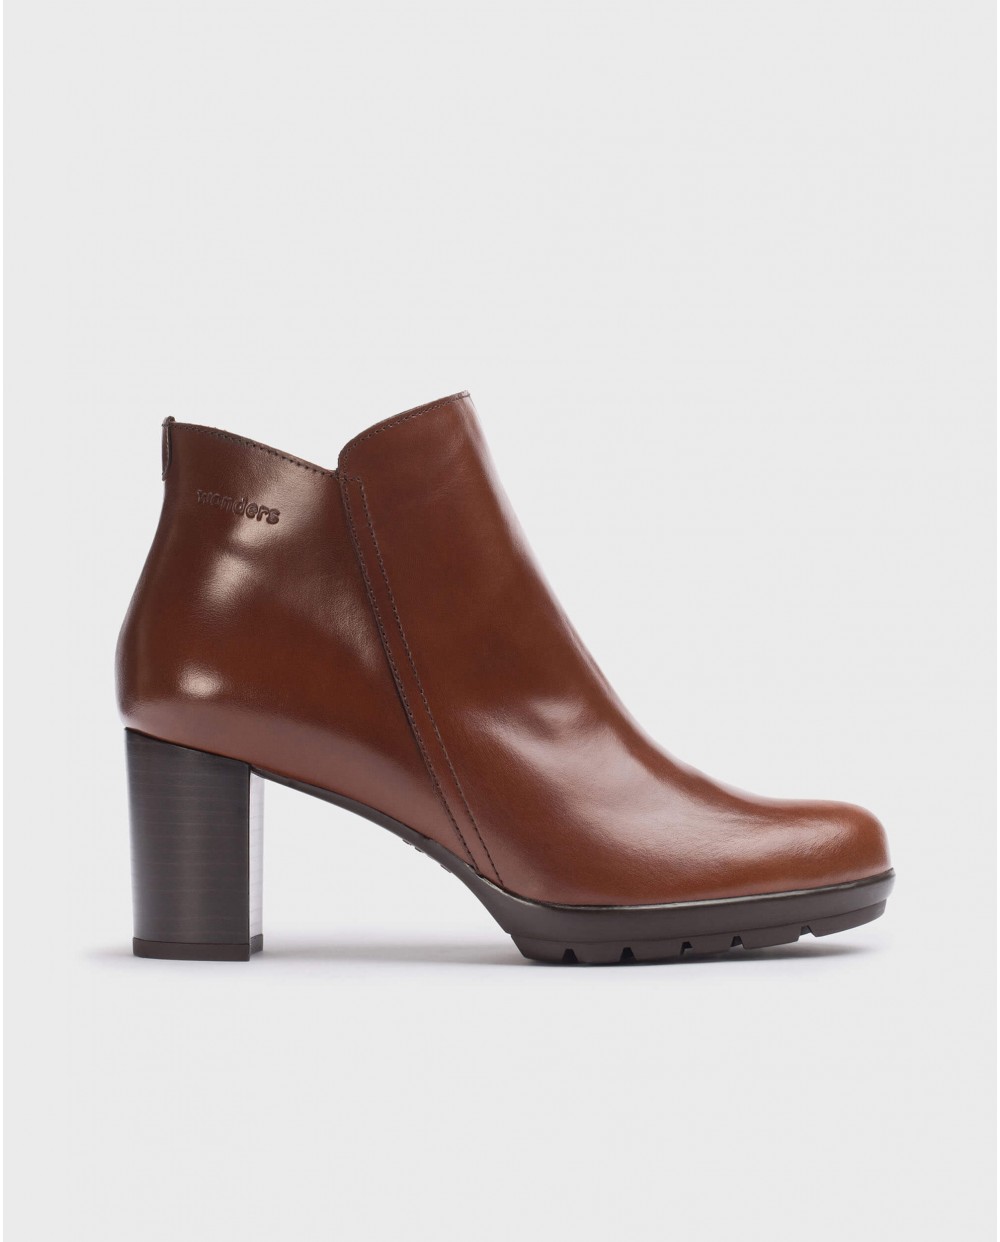 Wonders-Ankle Boots-Brown high heeled ankle boot